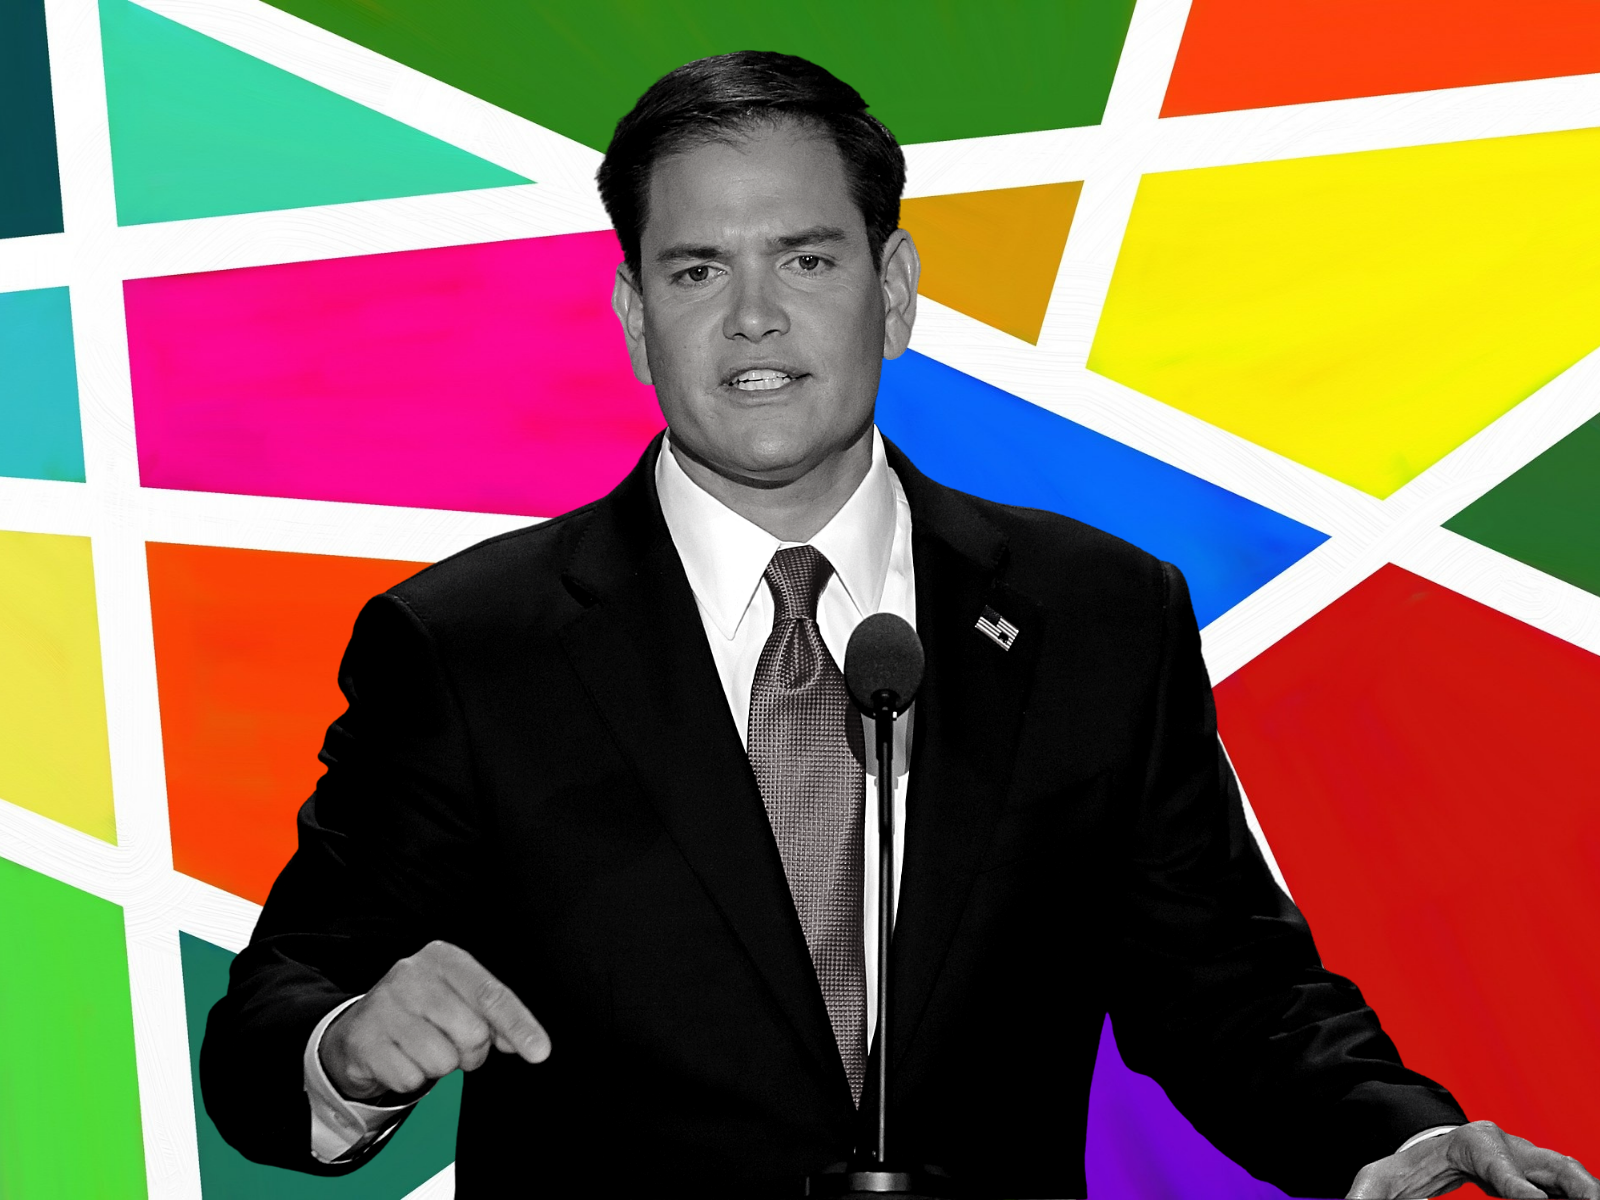 Marco Rubio still in the dark about Donald Trump VP intentions